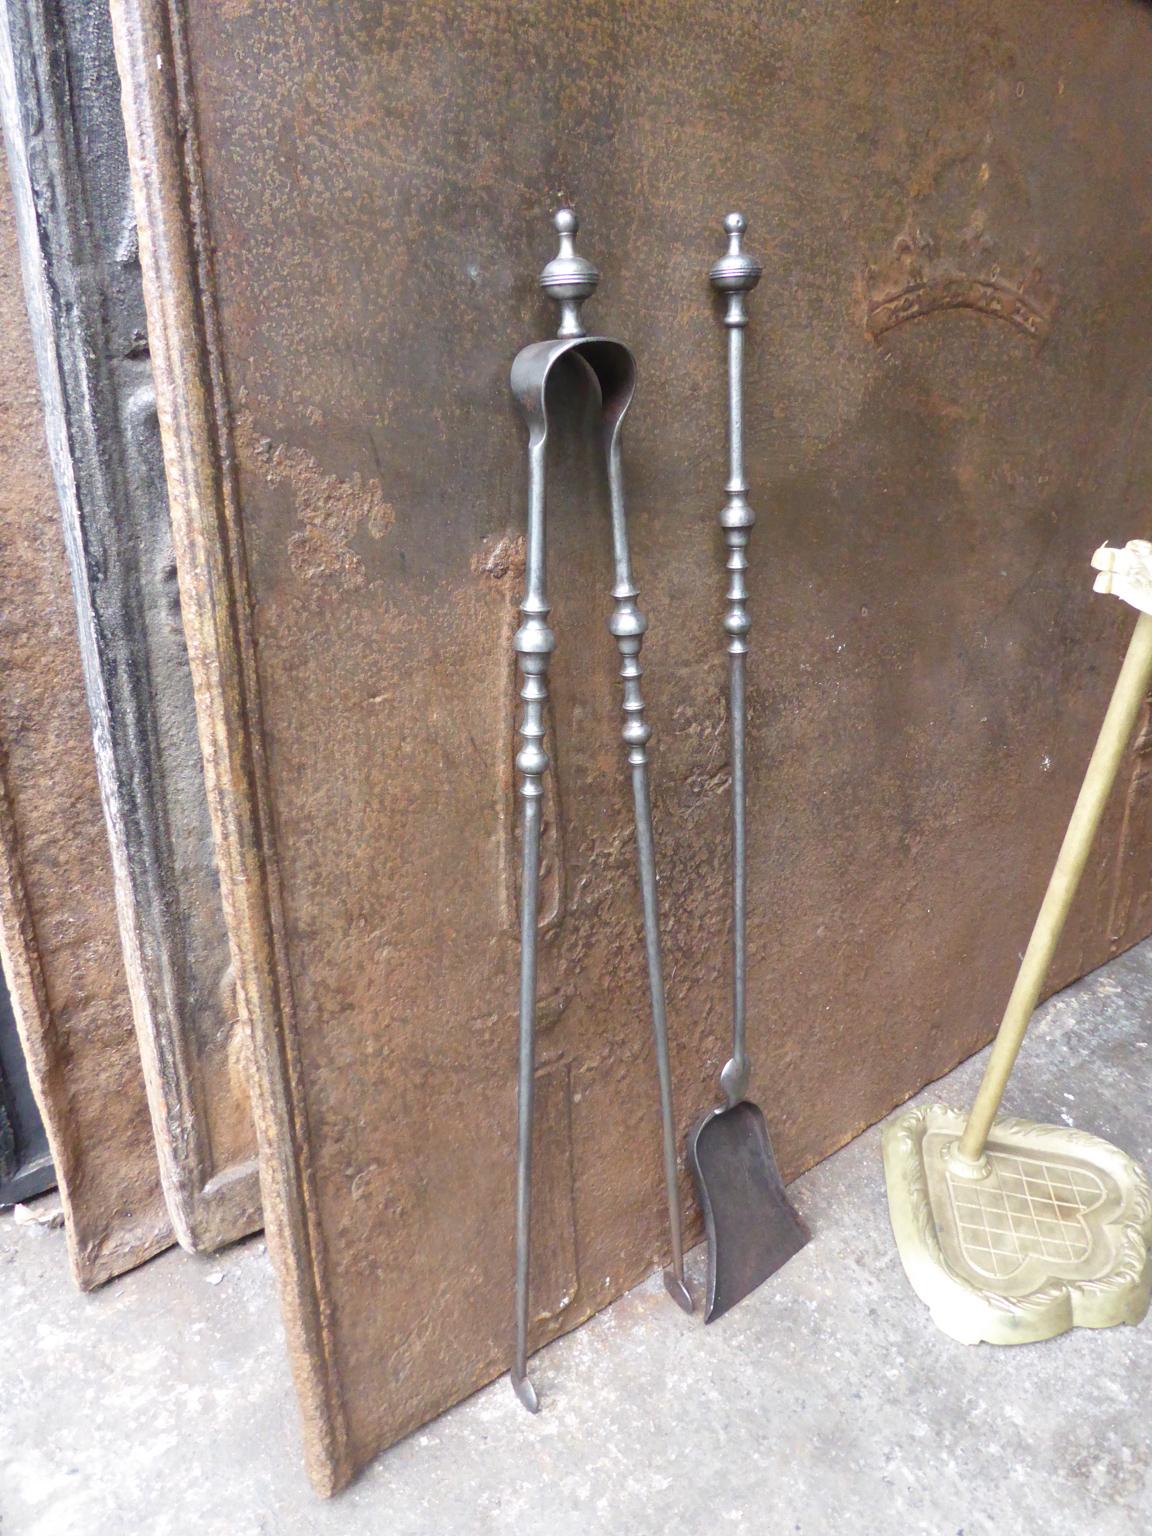 Antique French Fireplace Tools or Fire Tools, 19th - Early 20th Century 4